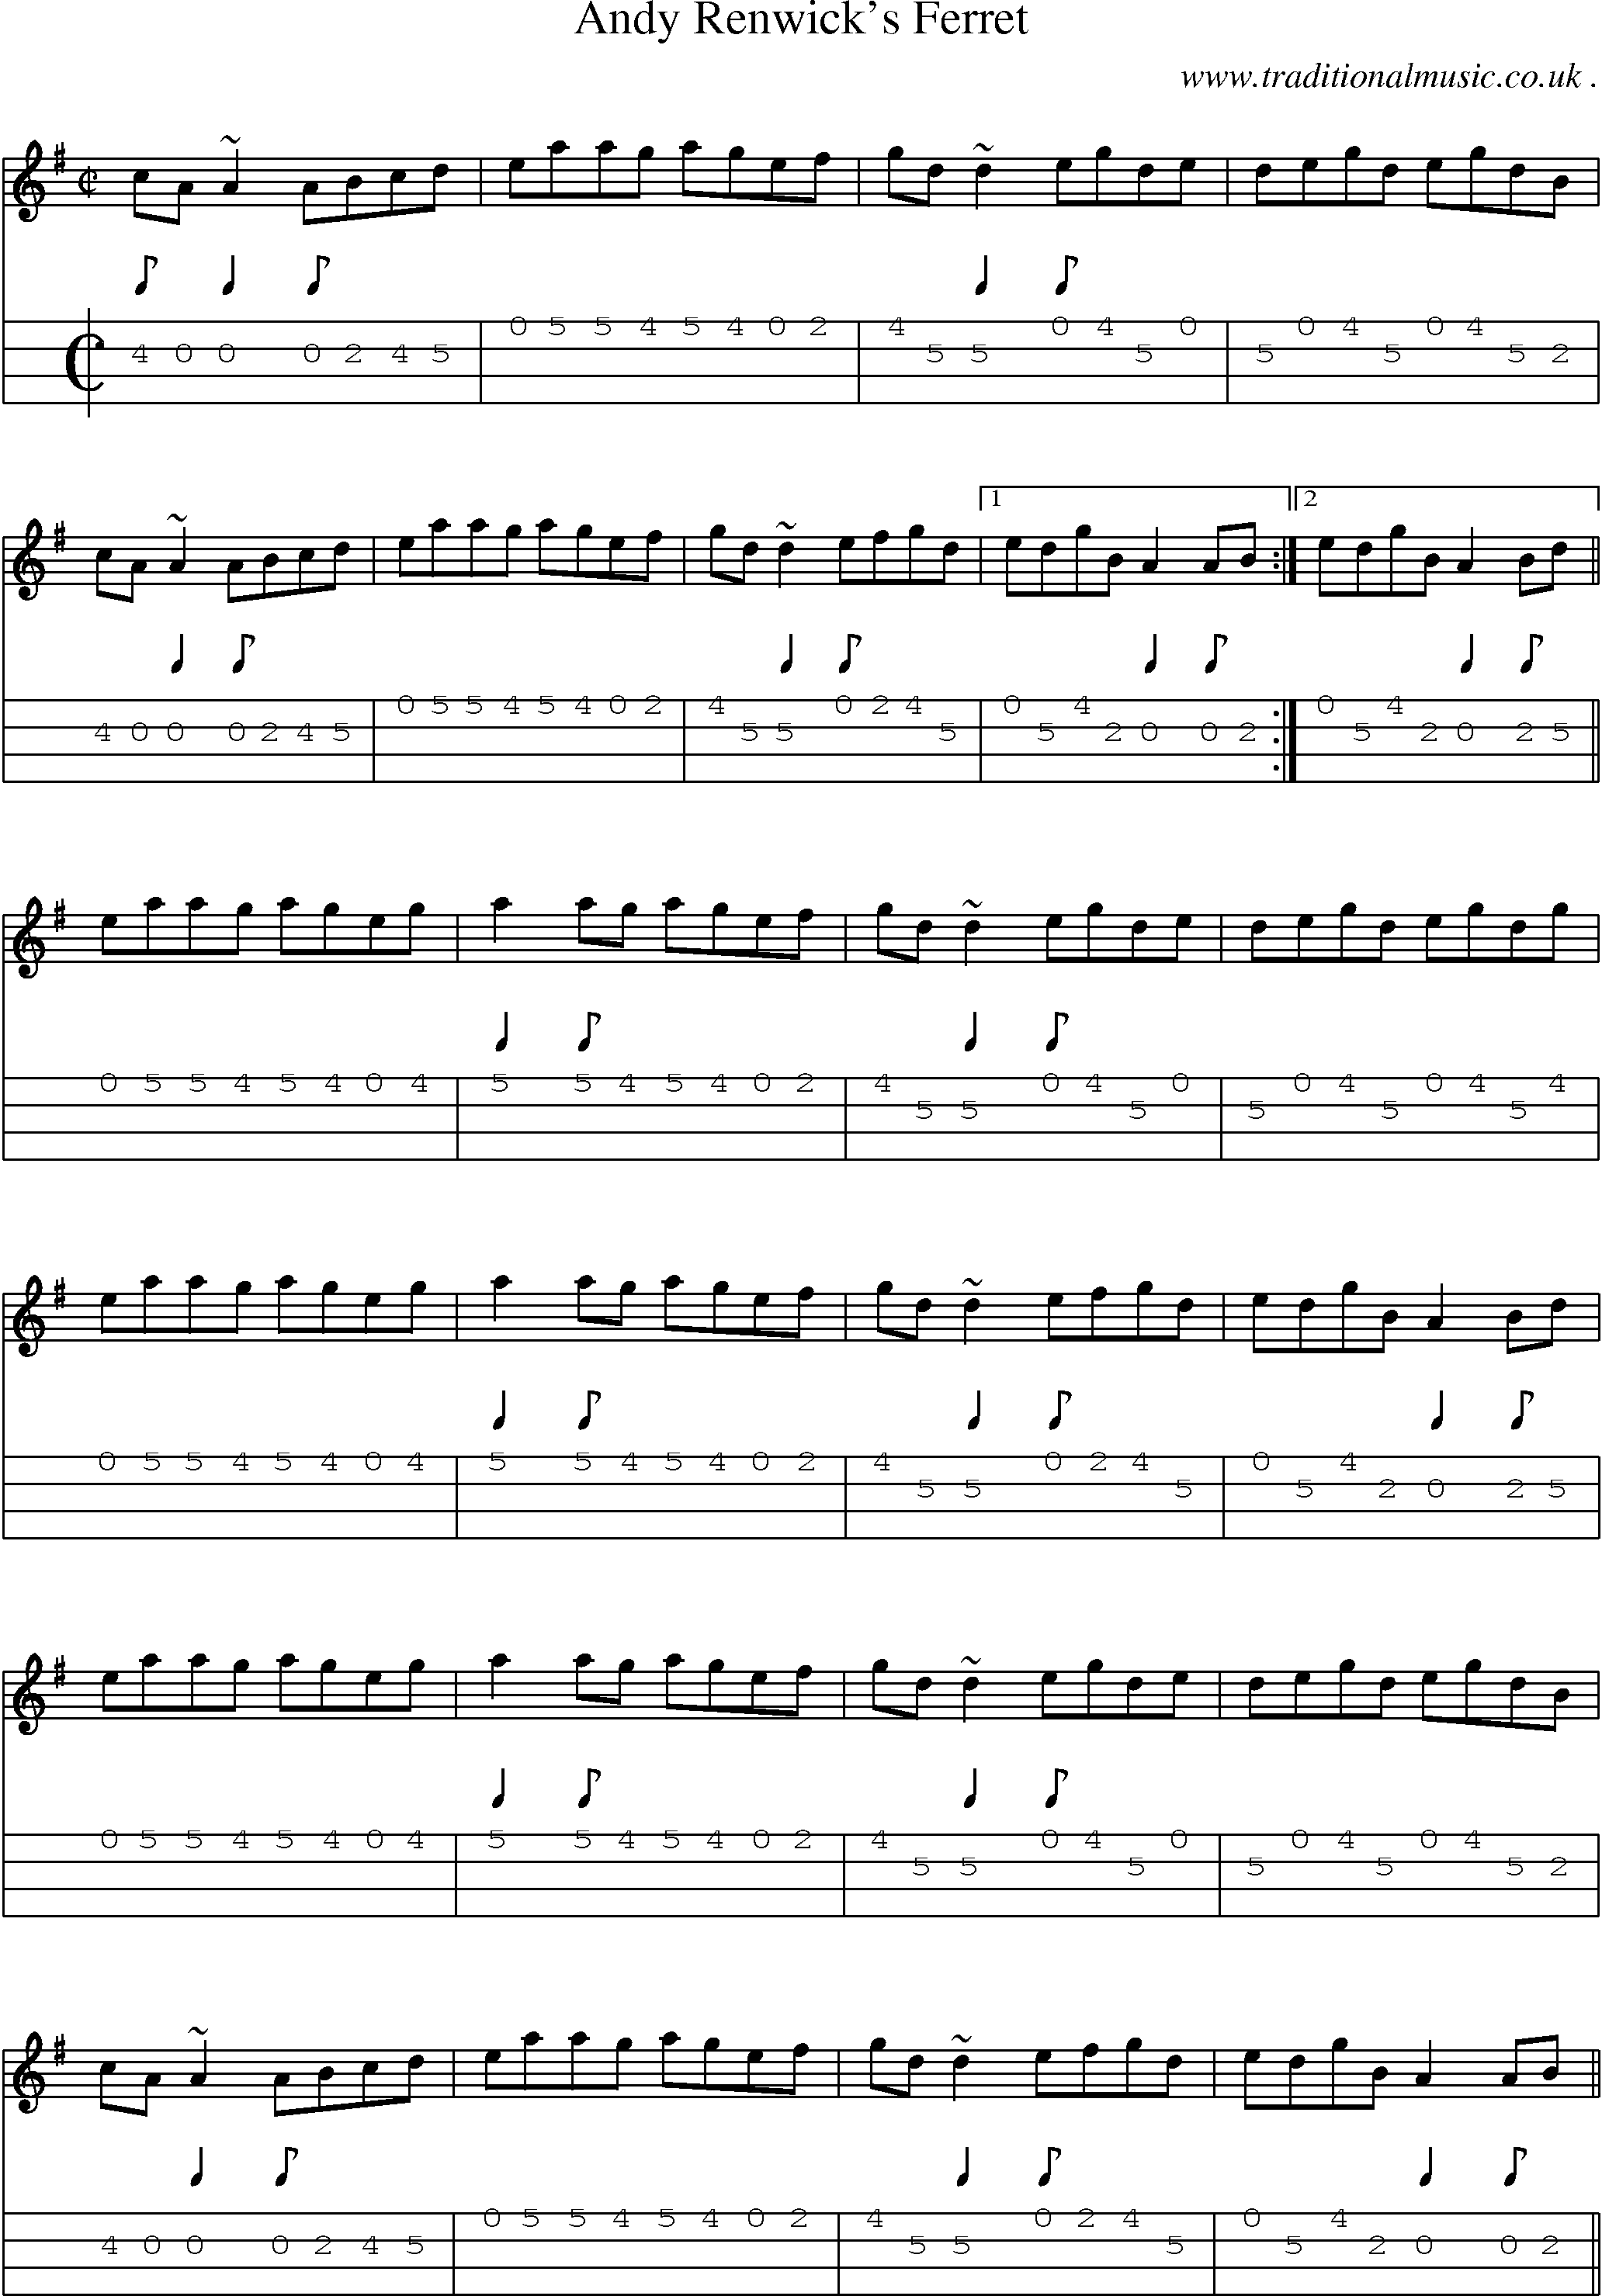 Sheet-music  score, Chords and Mandolin Tabs for Andy Renwicks Ferret